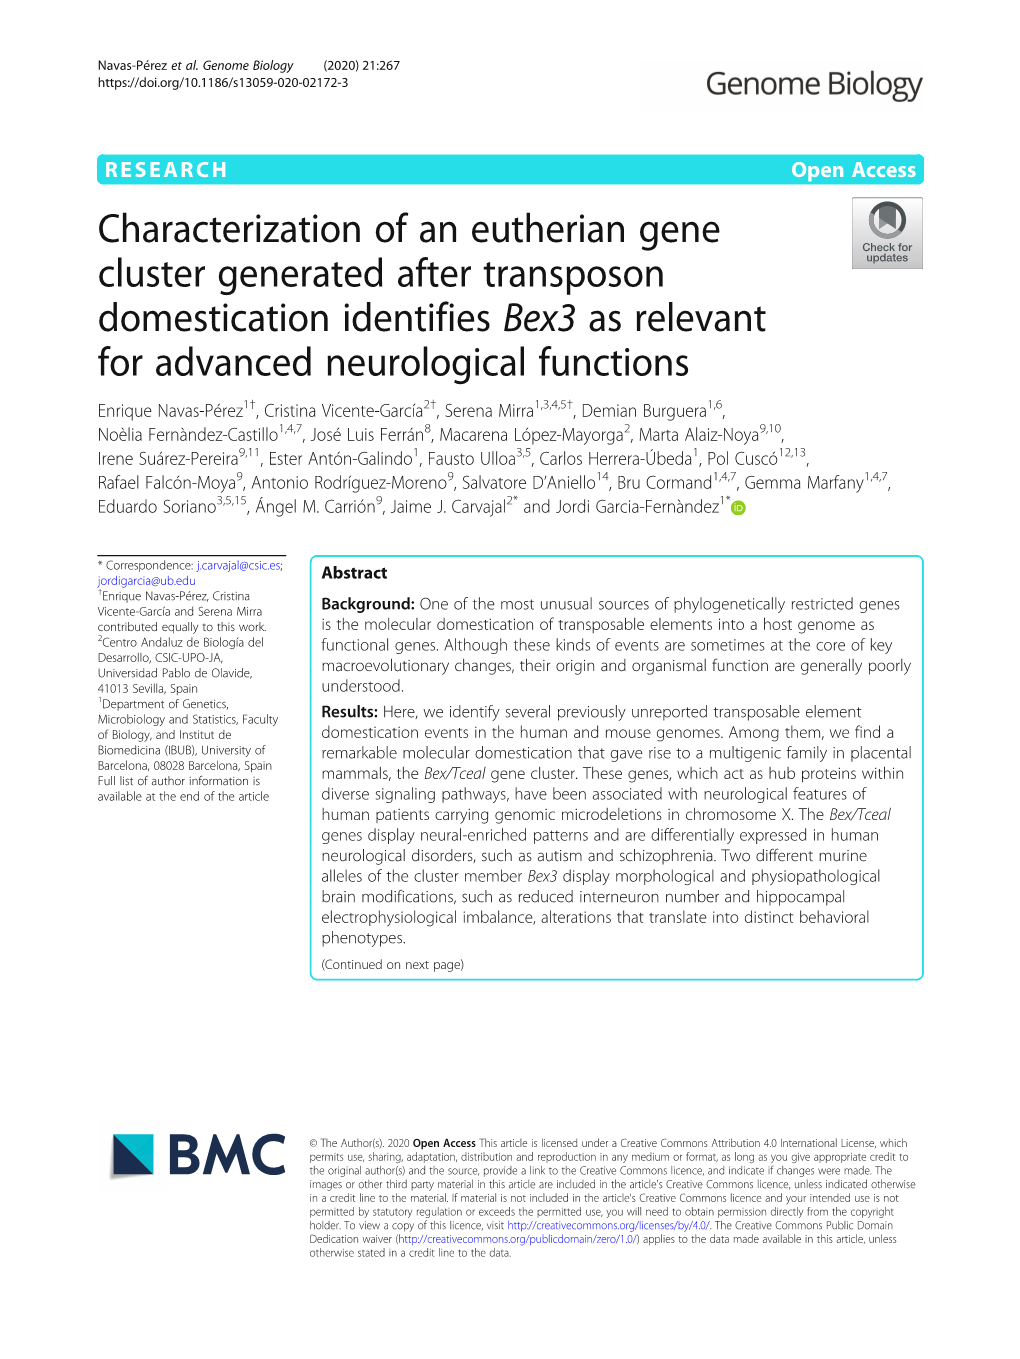 Characterization of an Eutherian Gene Cluster Generated After Transposon Domestication Identifies Bex3 As Relevant for Advanced